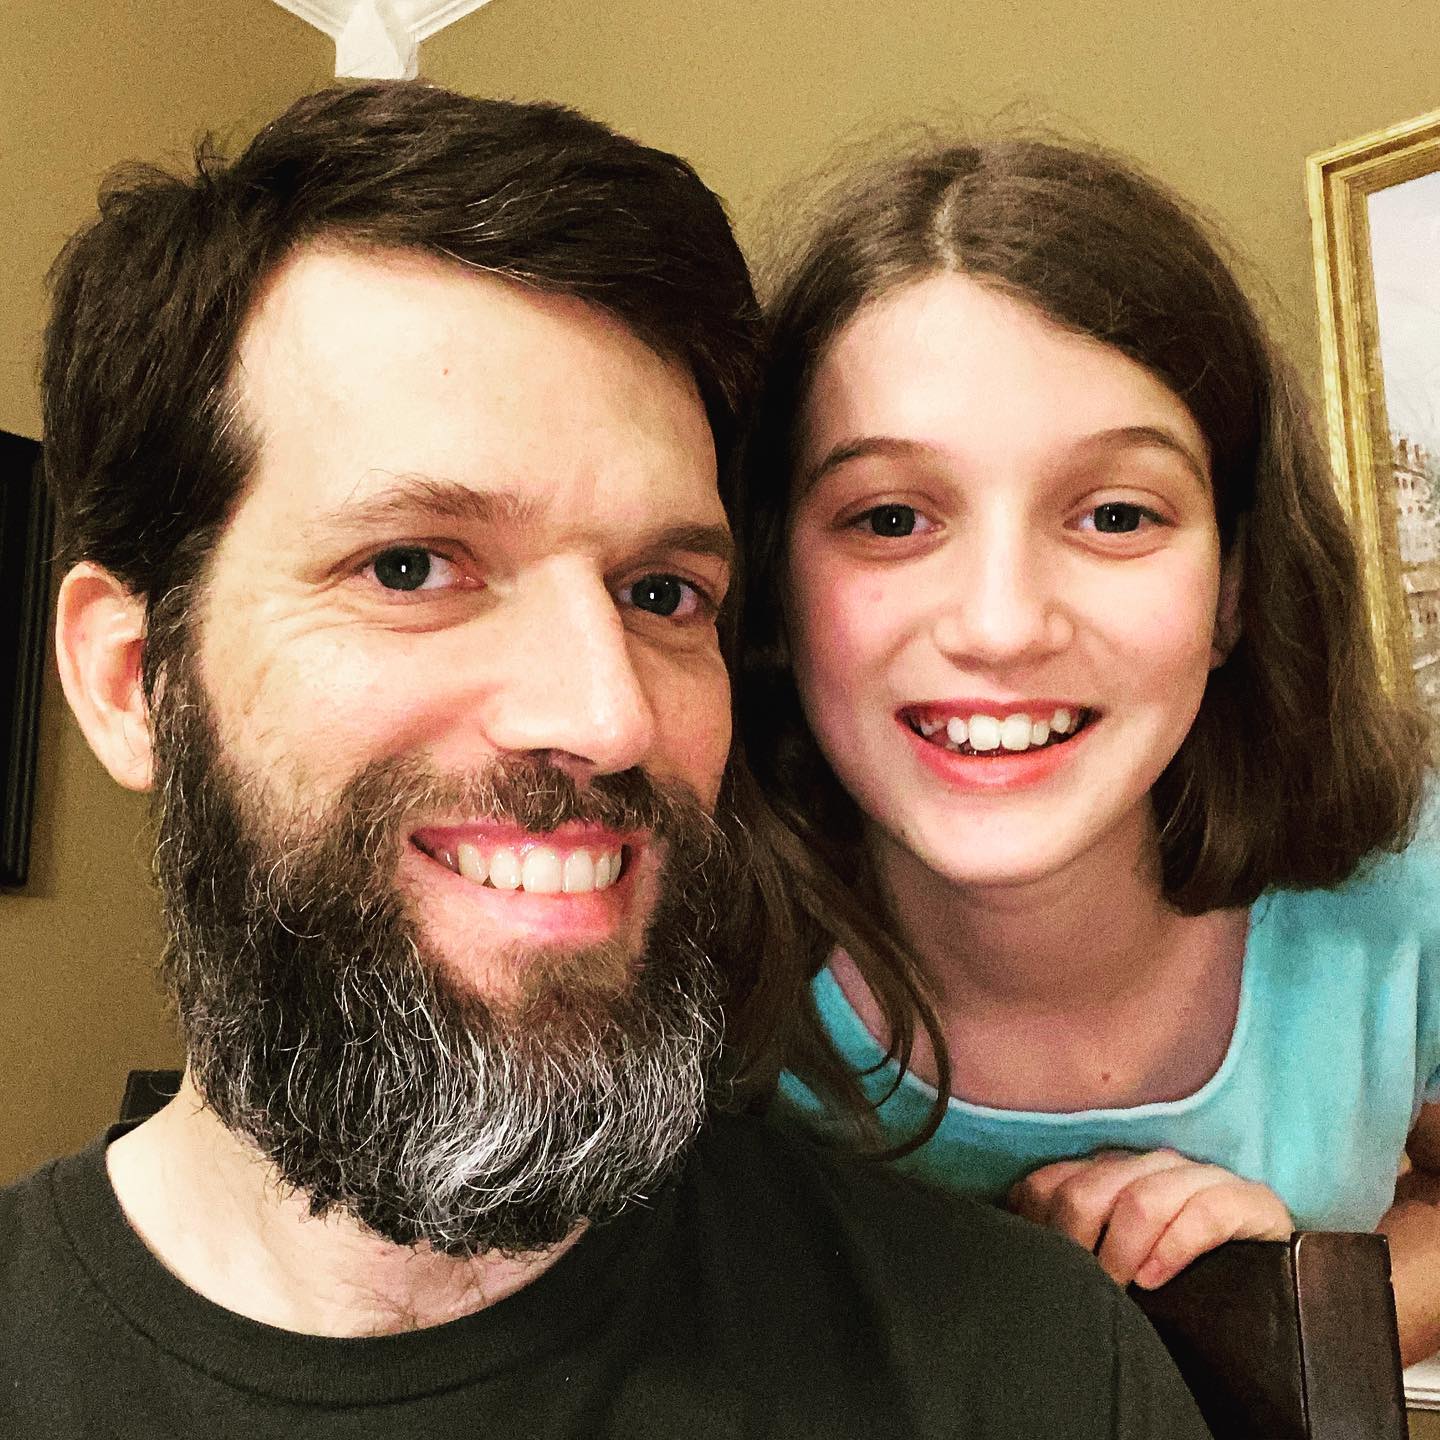 Self-quarantine beard update - Day 100. This will likely be the last update before I trim it for the first time. #family #beard